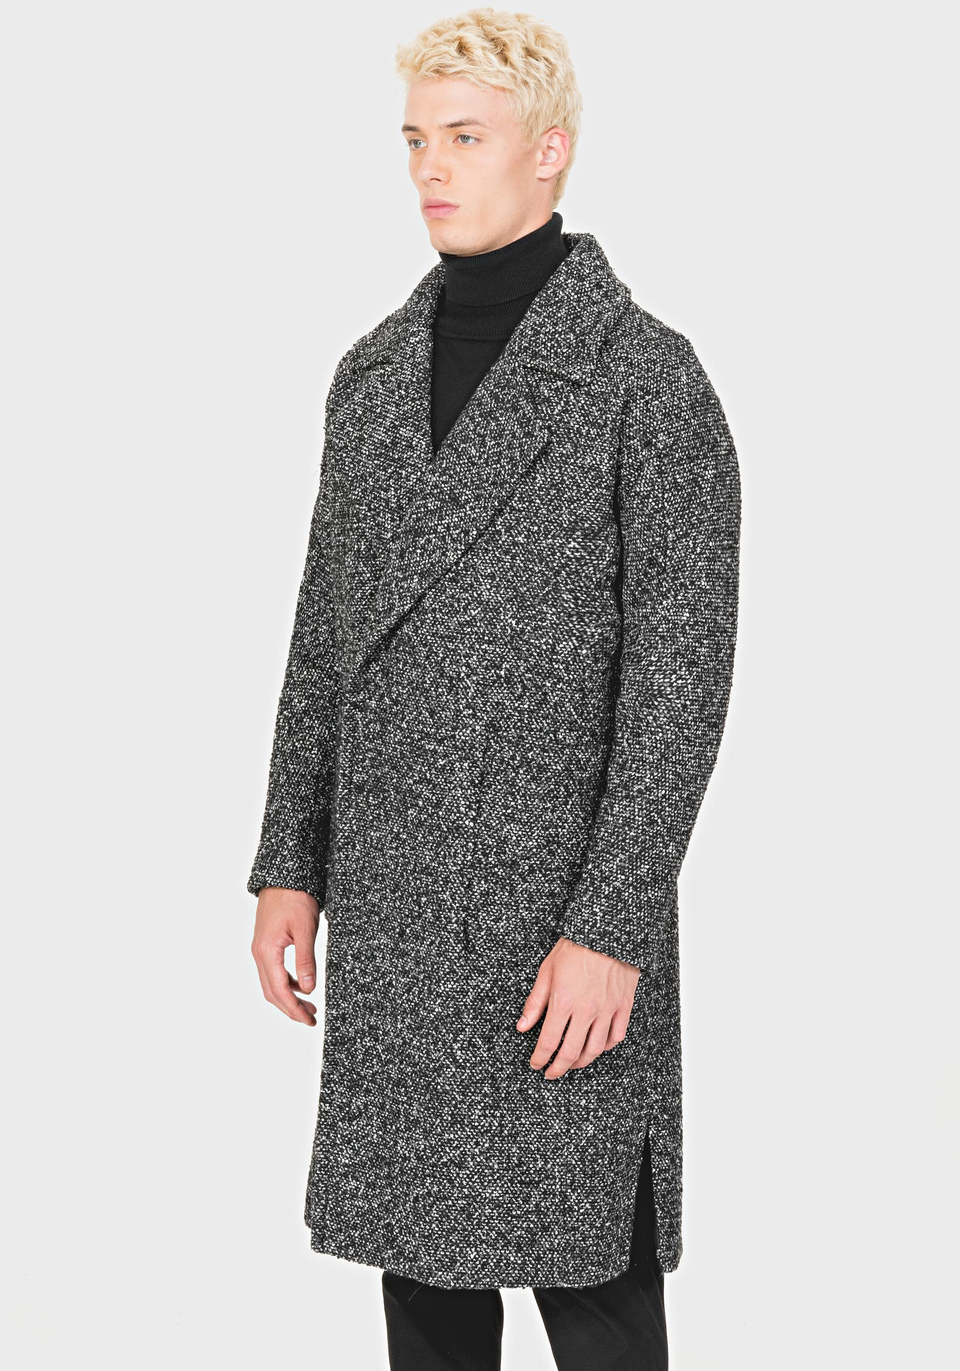 OVERSIZED DECONSTRUCTED COAT IN A TWO-TONE WOOL BLEND - Antony Morato Online Shop